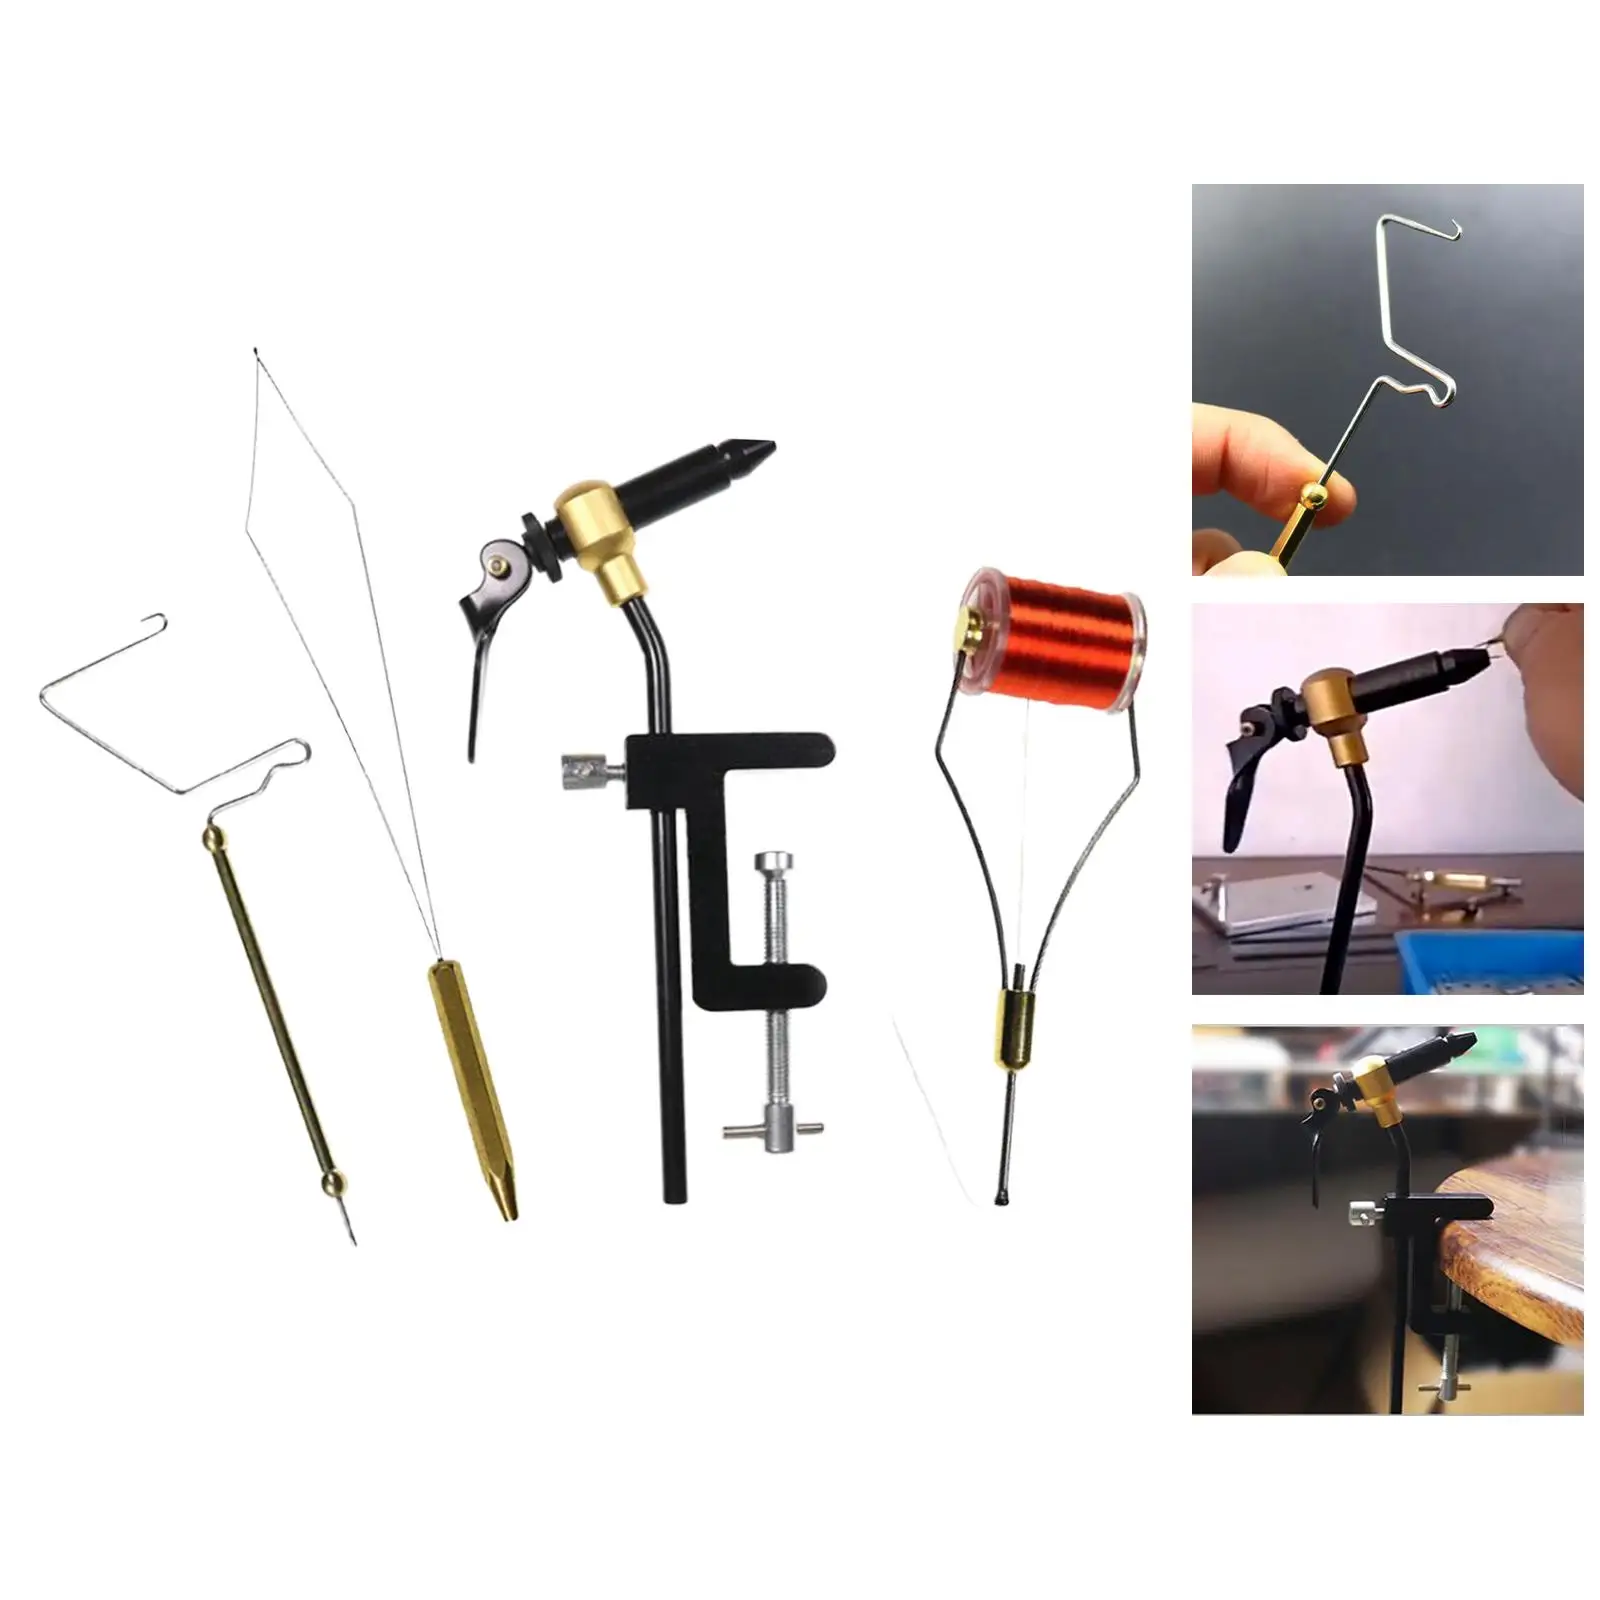 4 Pieces Fly Tying Tools Kit Fly Tying Vise Fishing Tool Whip Finisher